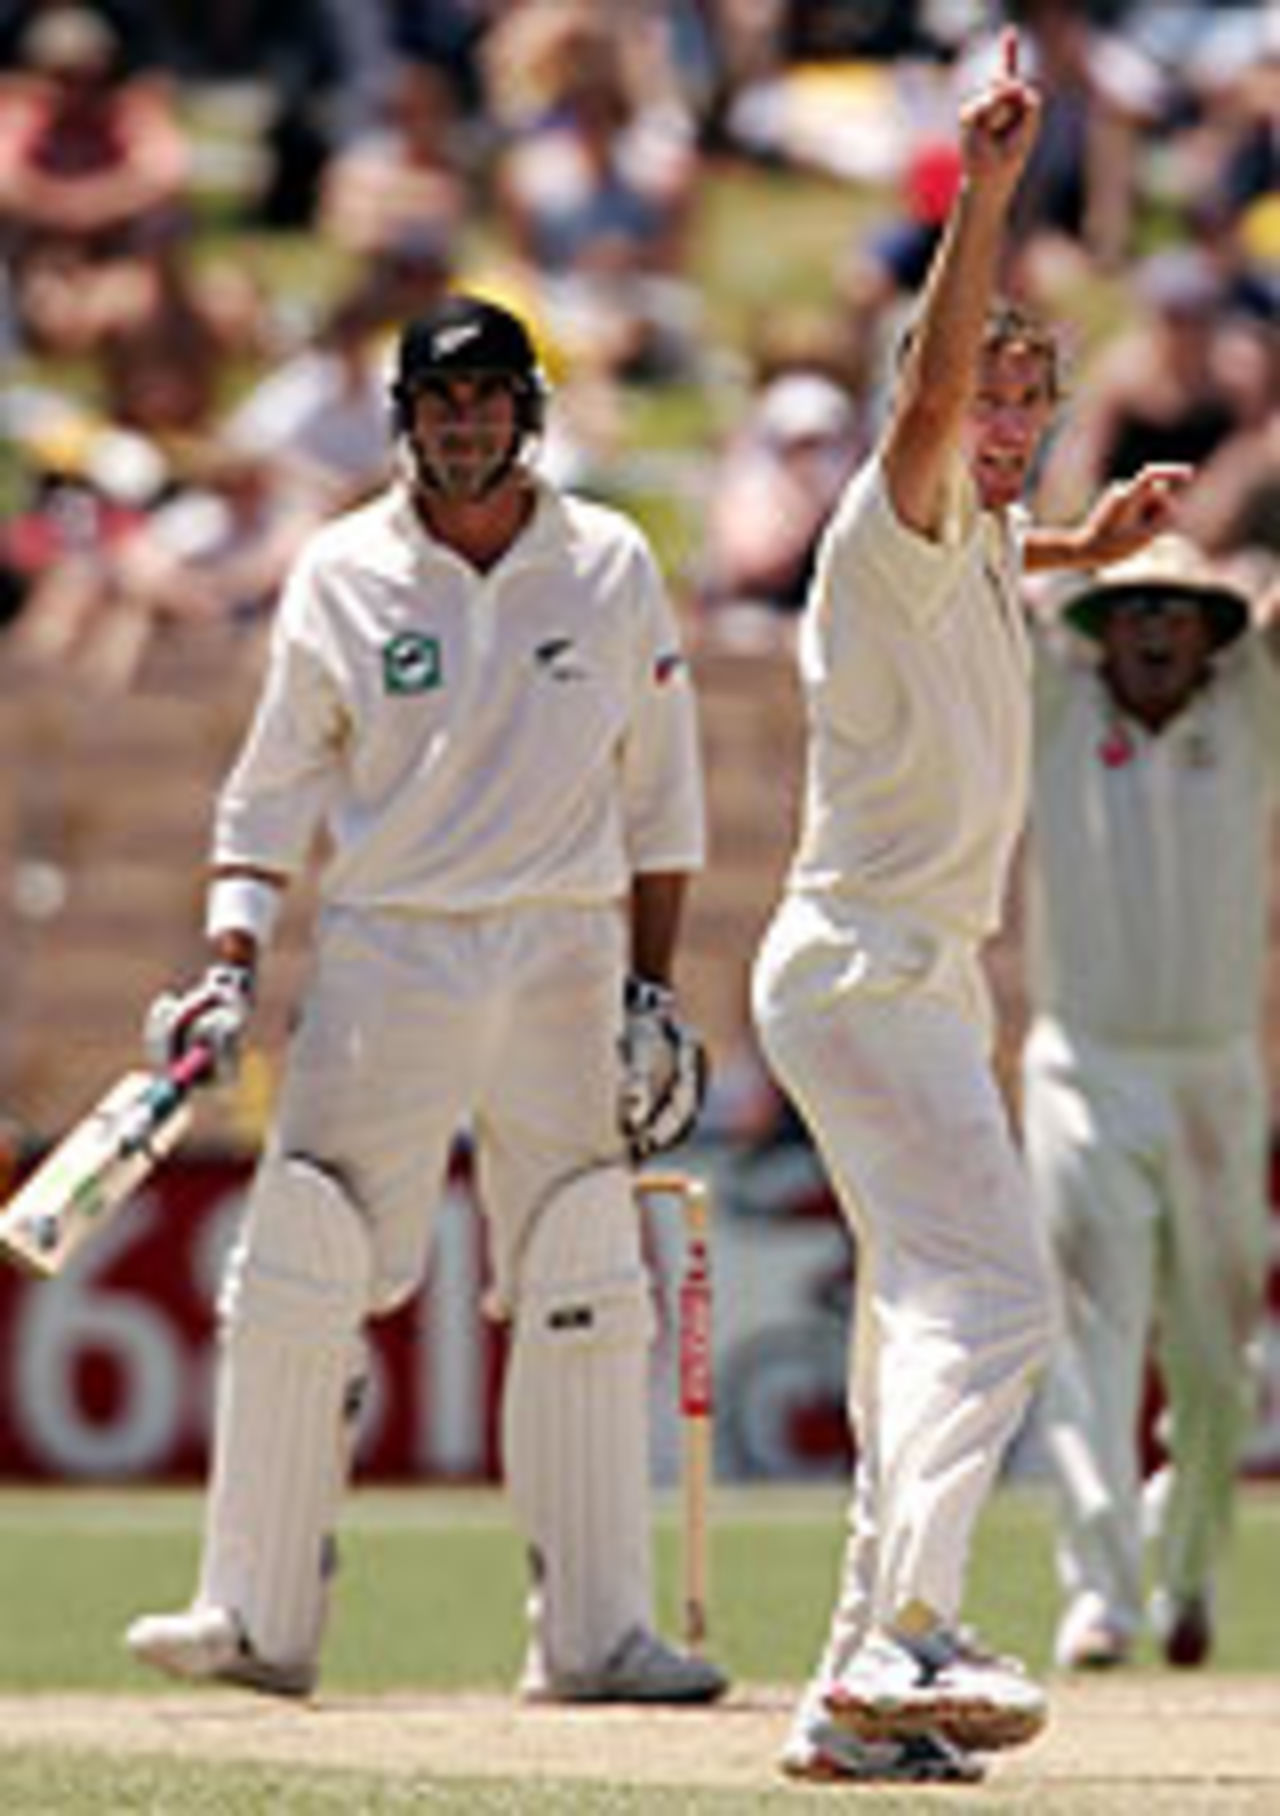 Glenn McGrath grabs the crucial wicket of Stephen Fleming, as New Zealand slump after lunch on the third day at Adelaide, 2nd Test, Adelaide, November 27, 2004